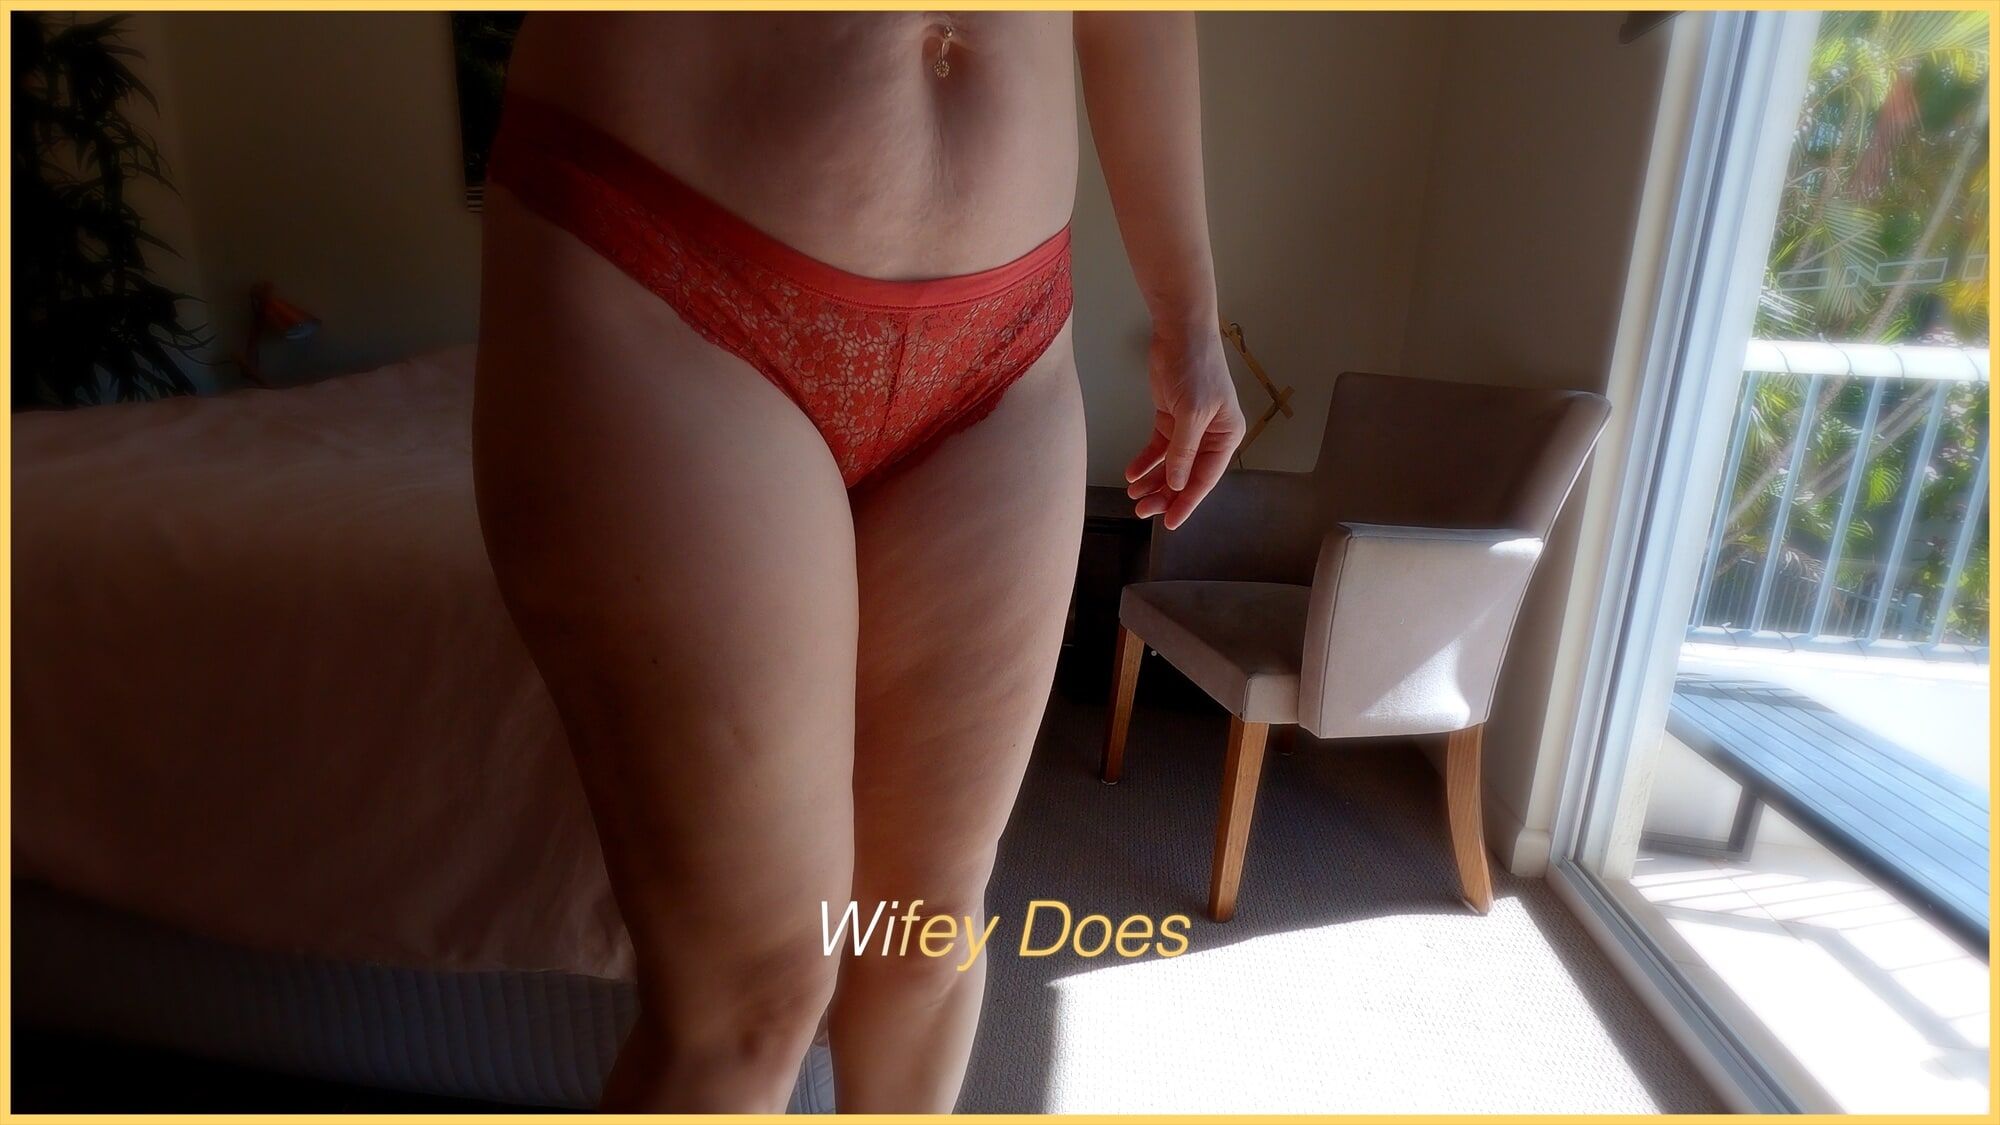 Wifey tries on different panties for your enjoyment #10